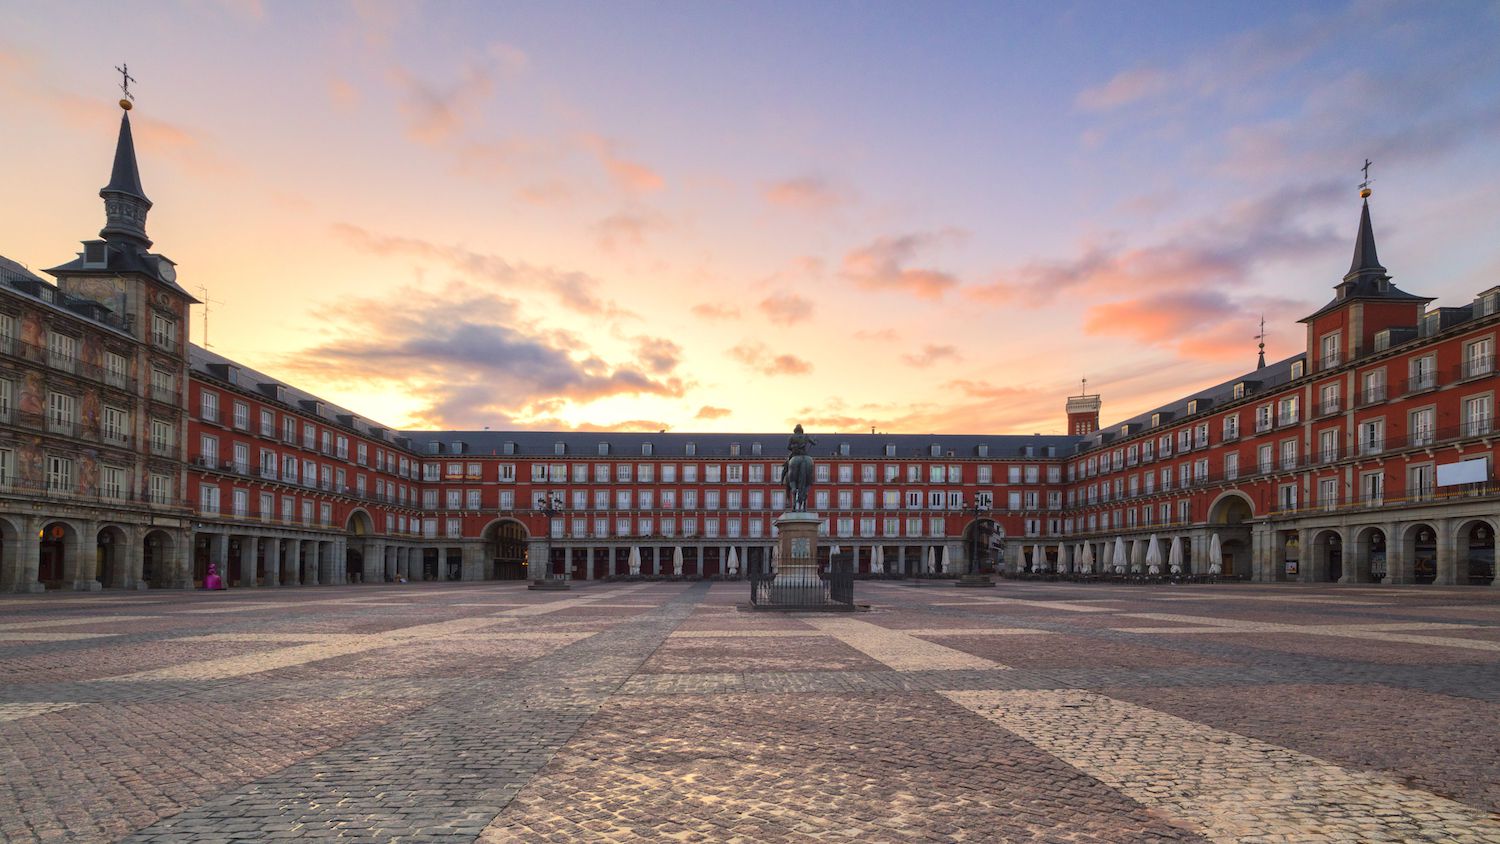 Plaza Mayor in Spain, Europe | Architecture - Rated 6.3